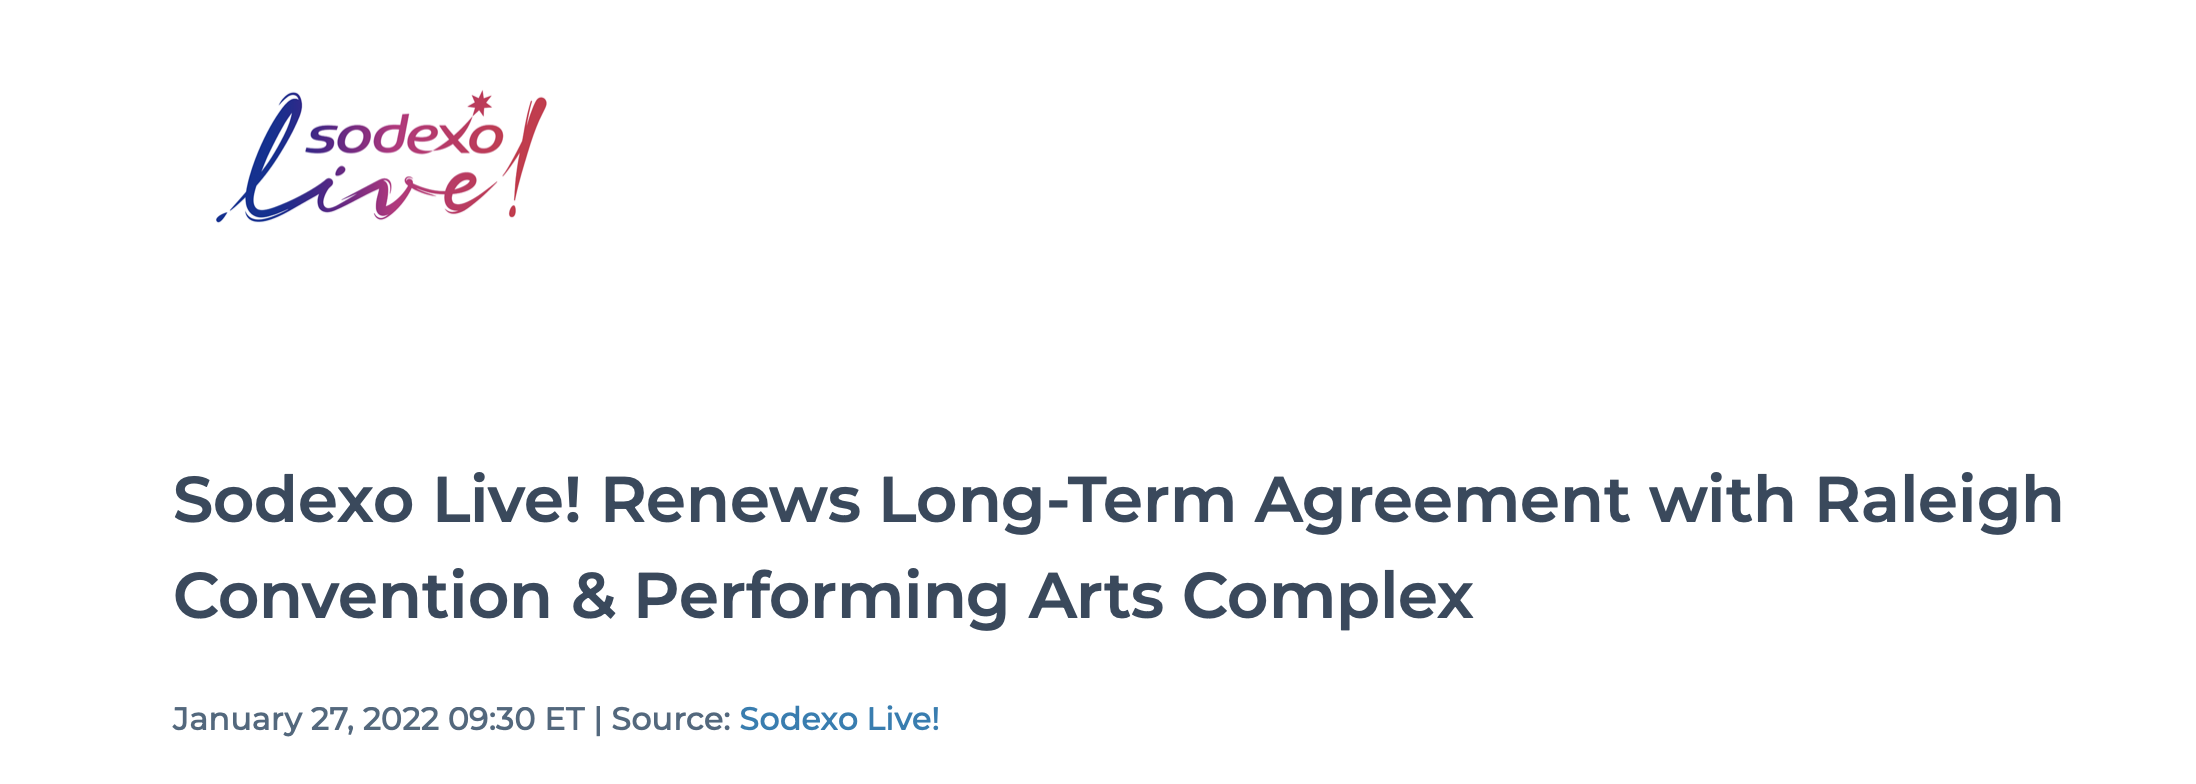 Sodexo live logo and the words Sodexo Live! Renews Long-Term Agreement with Raleigh Convention & Performing Arts Complex